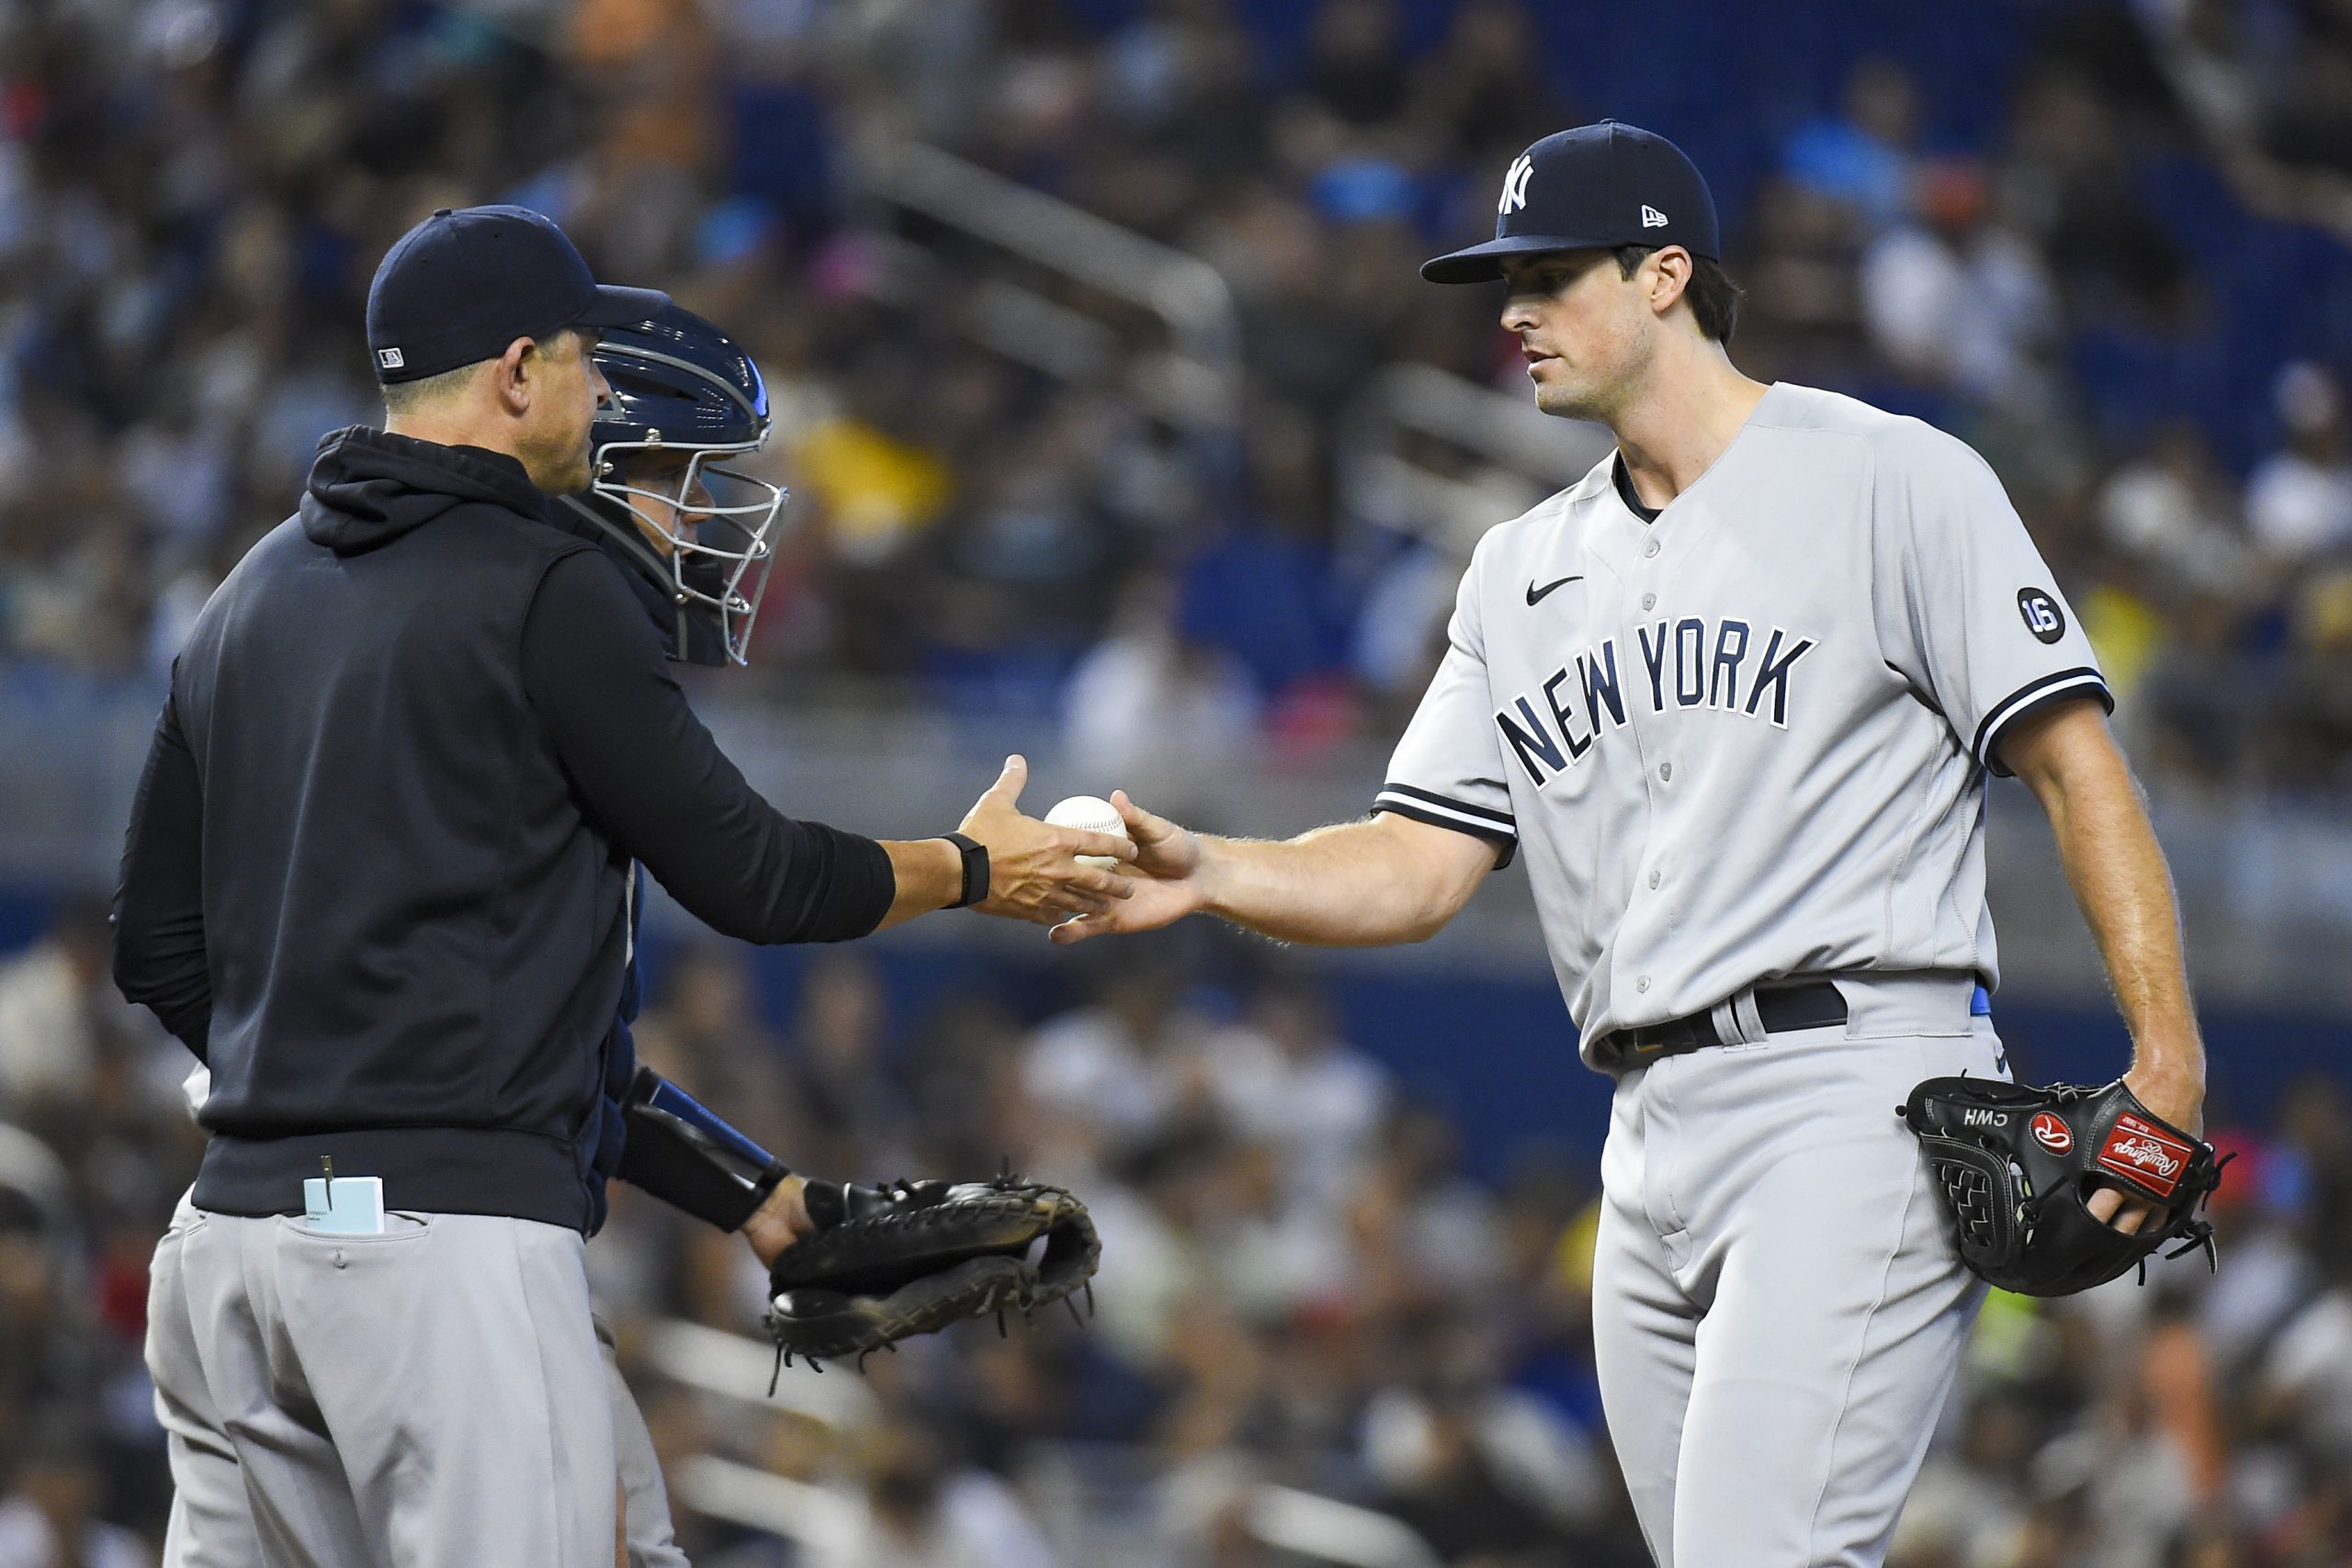 Yankees reliever Clay Holmes tu mlb yankees roster 2020 rning his sinker  into late-inning weapon